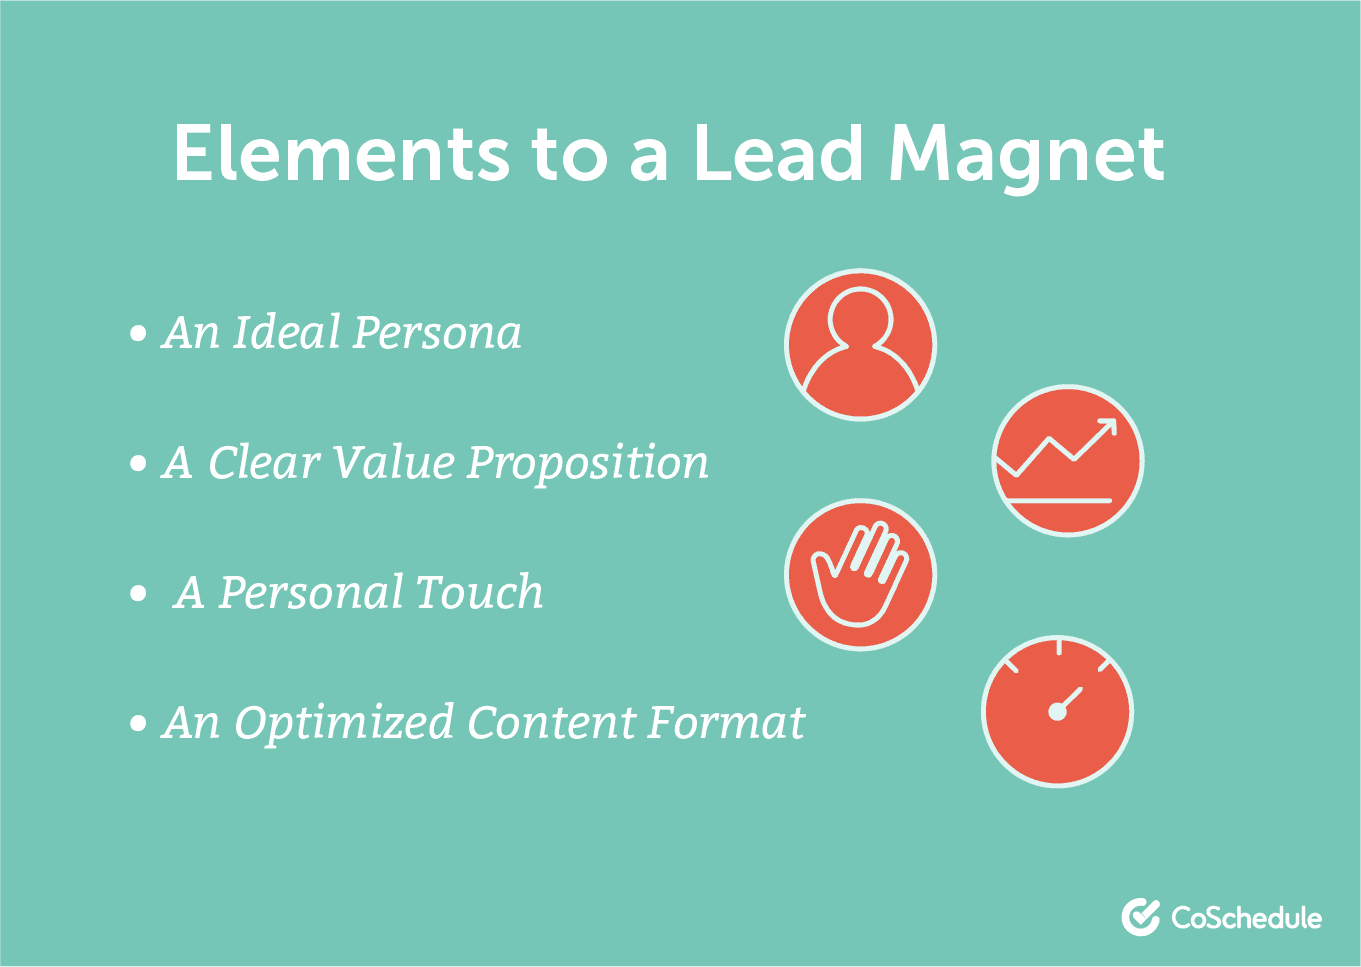 Elements to a lead magnet